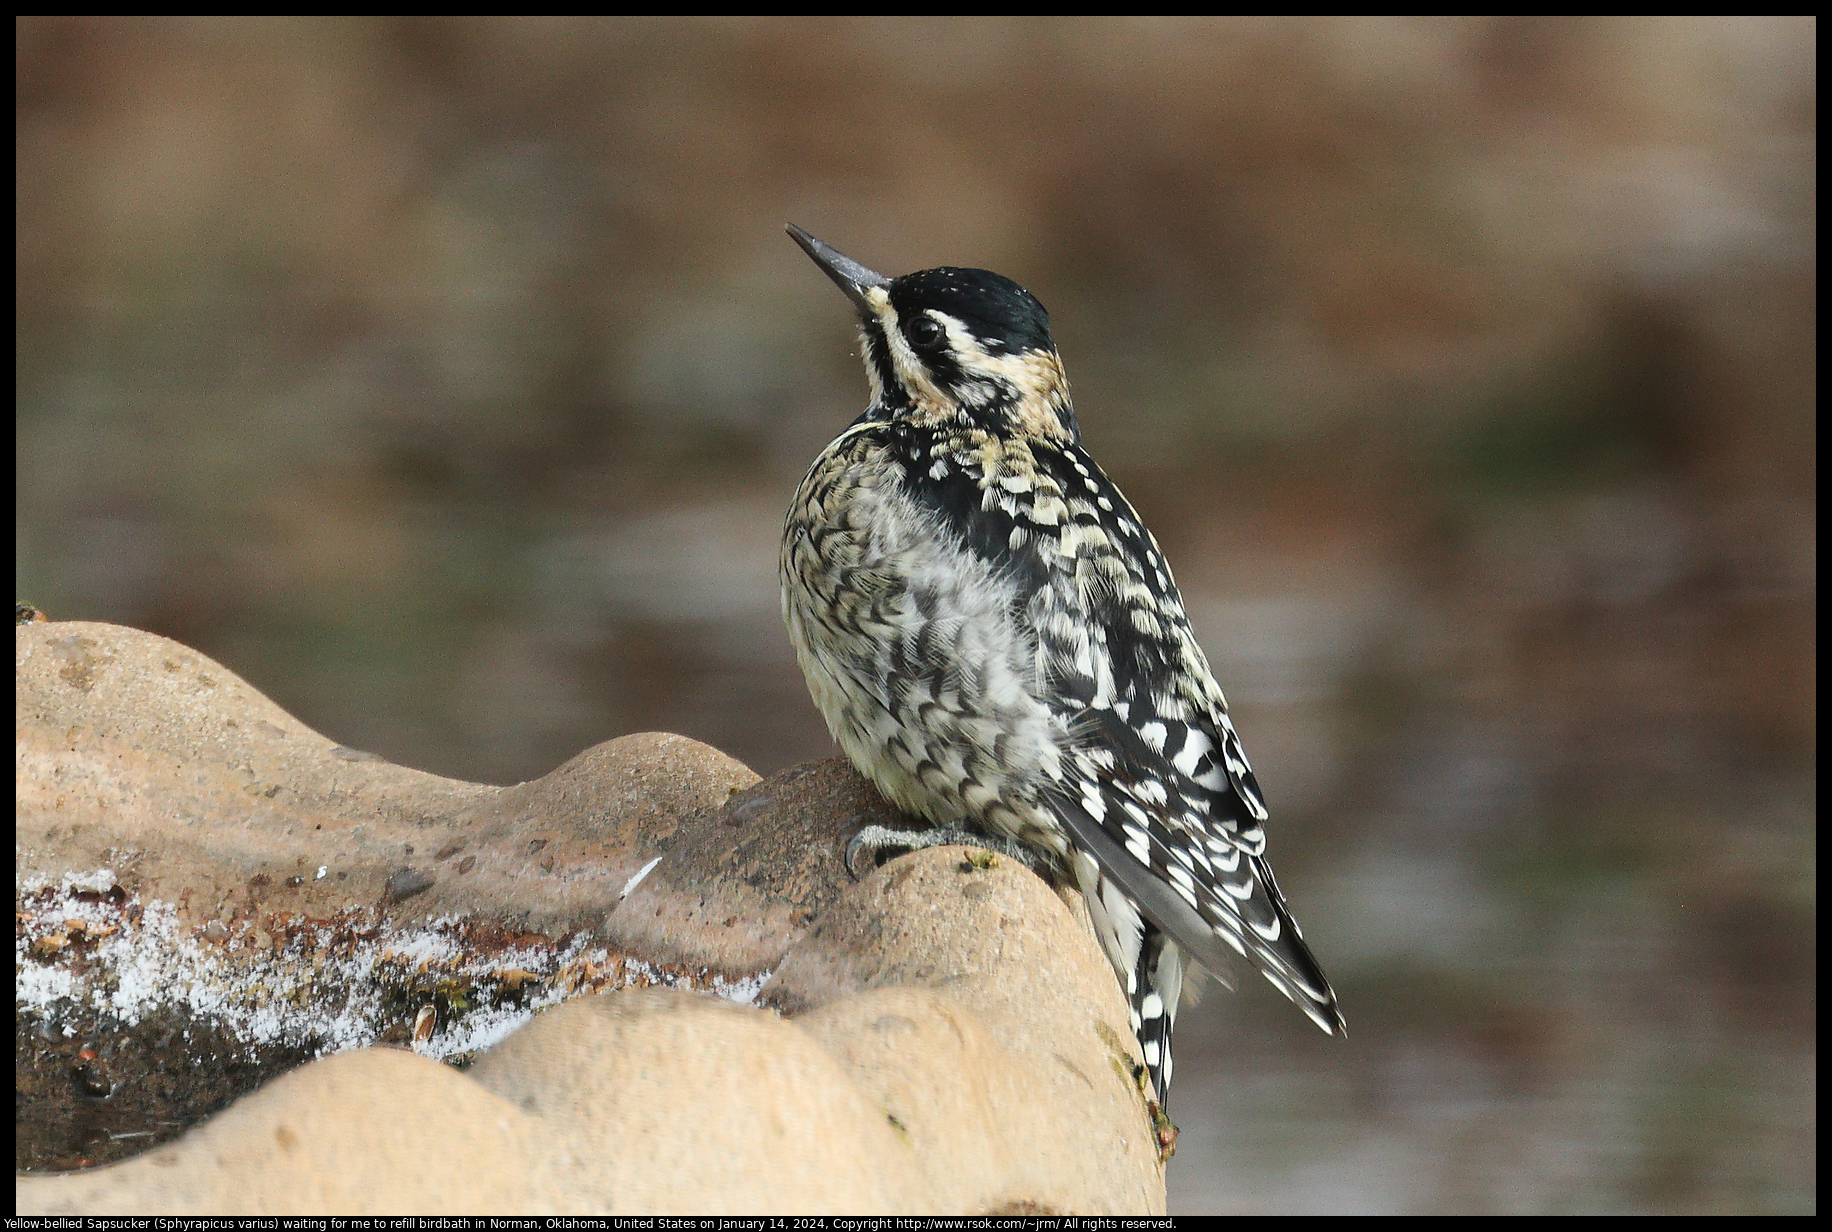 Yellow-bellied Sapsucker (Sphyrapicus varius) waiting for me to refill birdbath in Norman, Oklahoma, United States on January 14, 2024